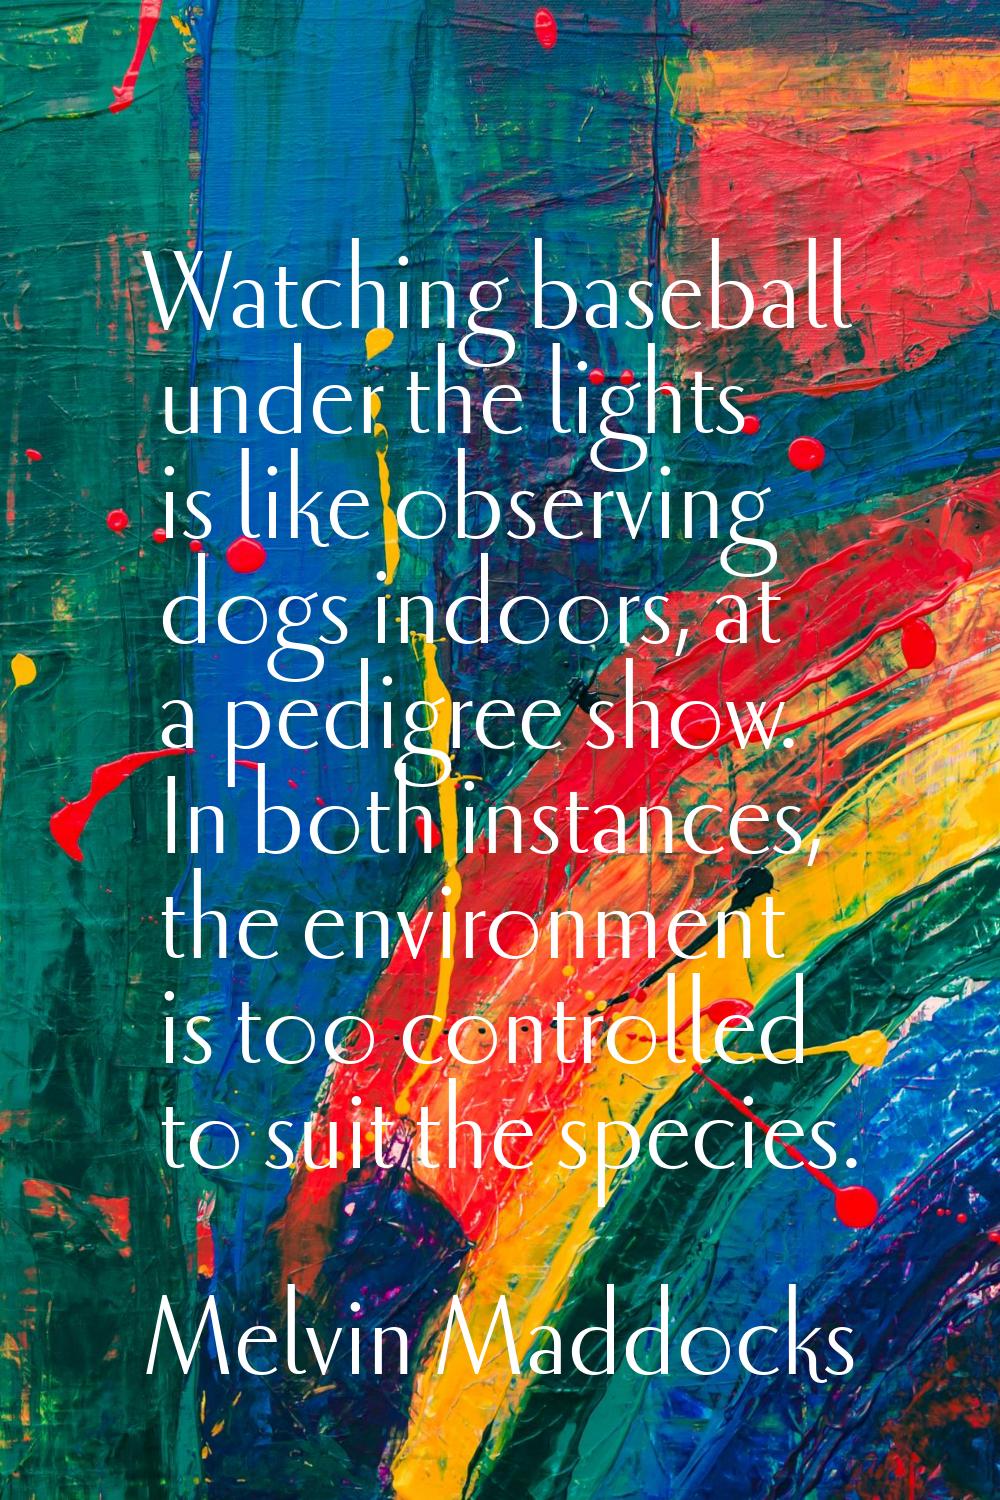 Watching baseball under the lights is like observing dogs indoors, at a pedigree show. In both inst